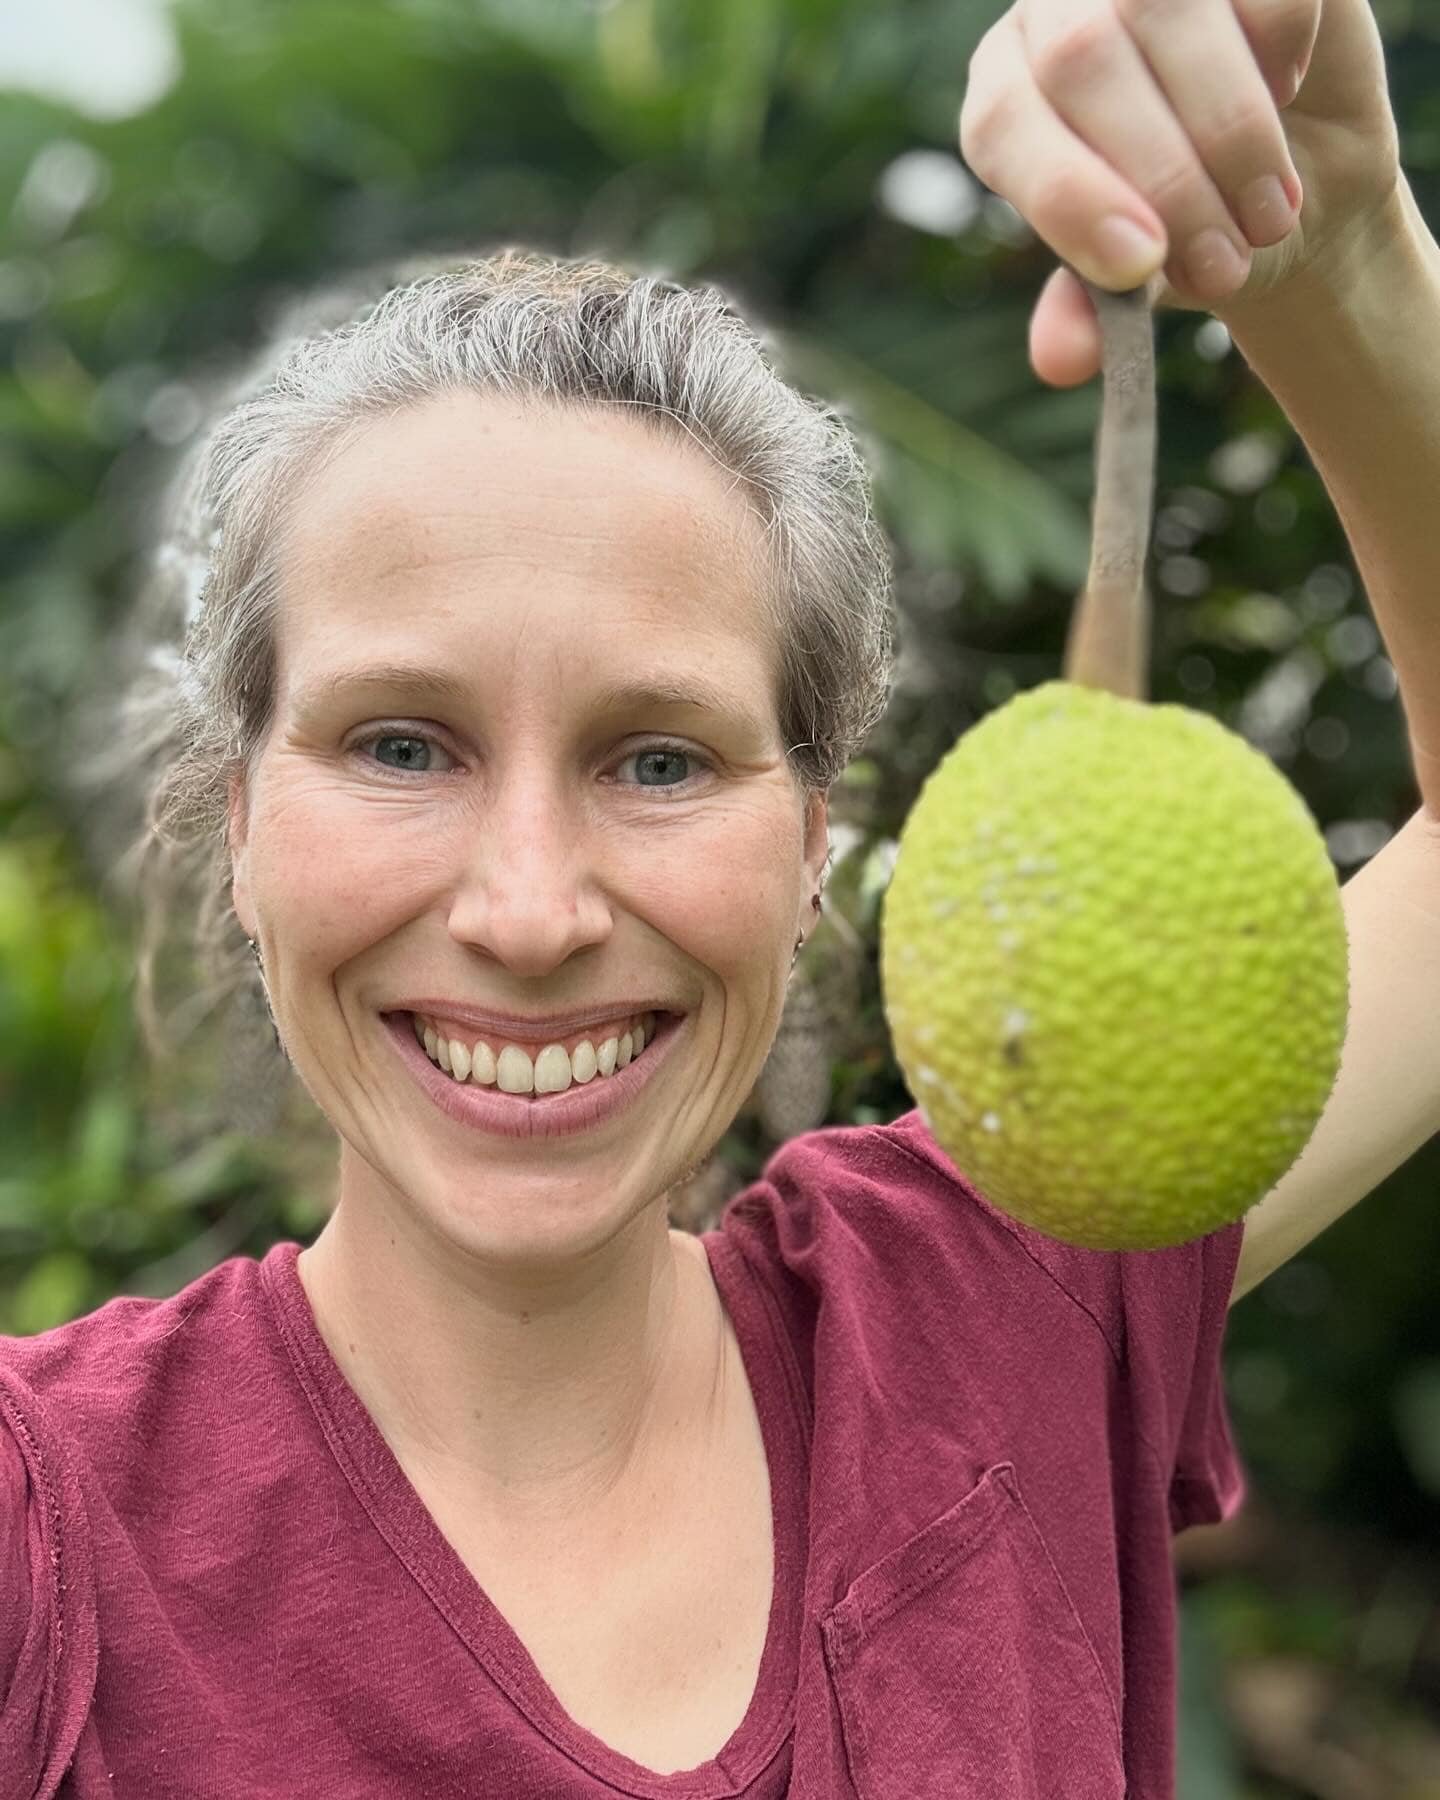 You wouldn&rsquo;t dig up a seed to see if it&rsquo;s growing&rdquo; 
for some reason that quote sticks with me

Our ulu (breadfruit) tree produced its first fruit this season.  It&rsquo;s been years that we&rsquo;ve been watching the tree grow. 

An